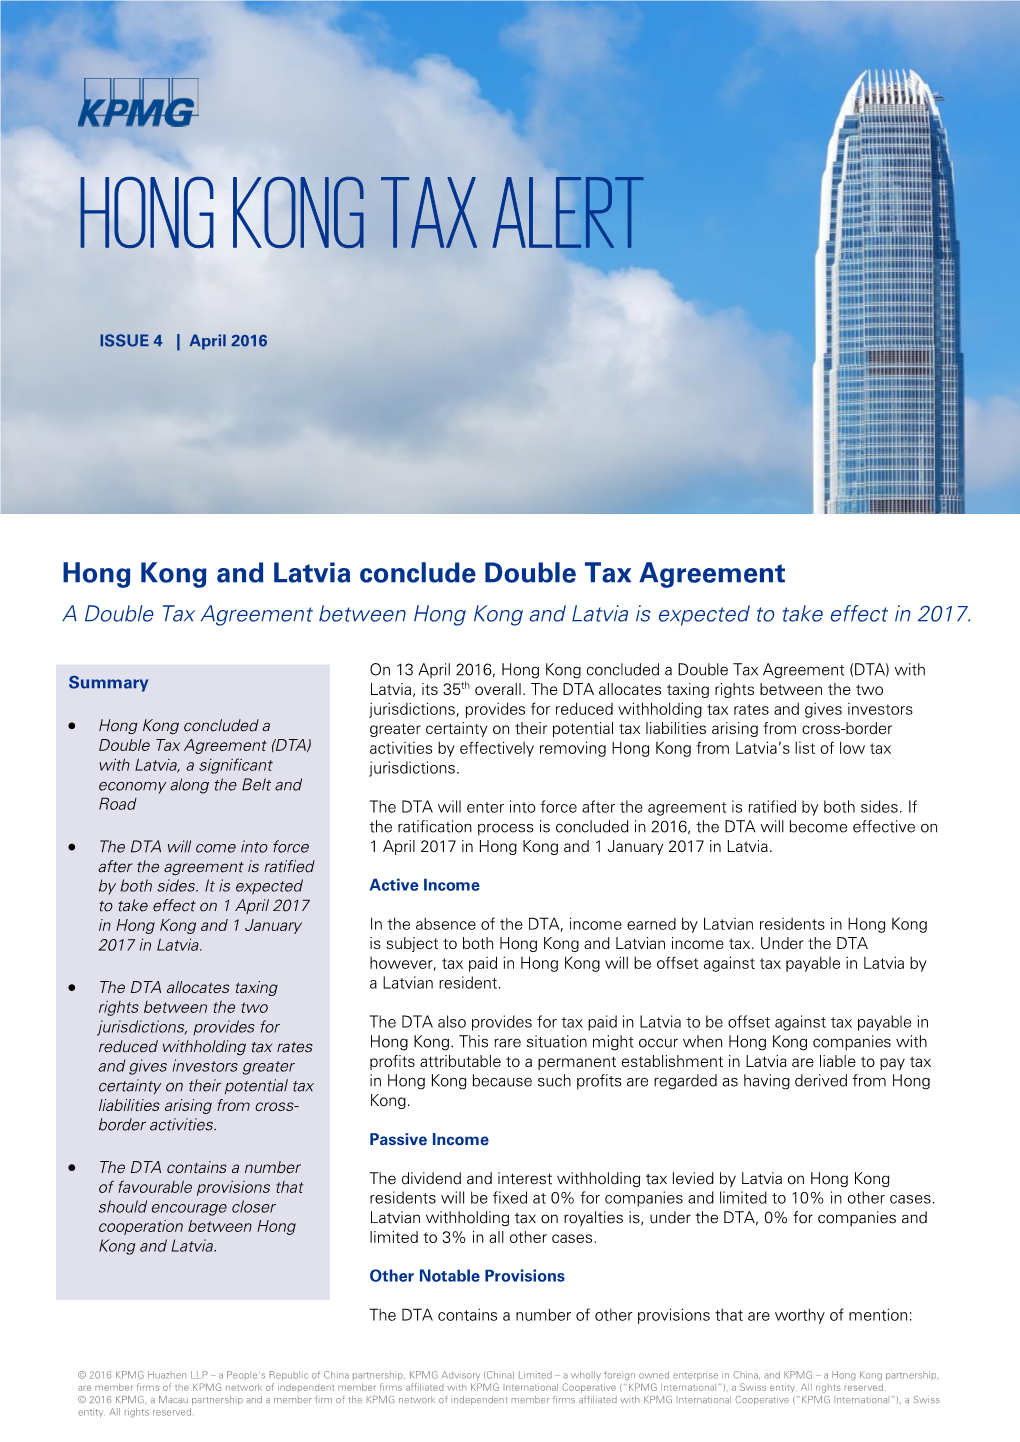 Hong Kong and Latvia Conclude Double Tax Agreement a Double Tax Agreement Between Hong Kong and Latvia Is Expected to Take Effect in 2017